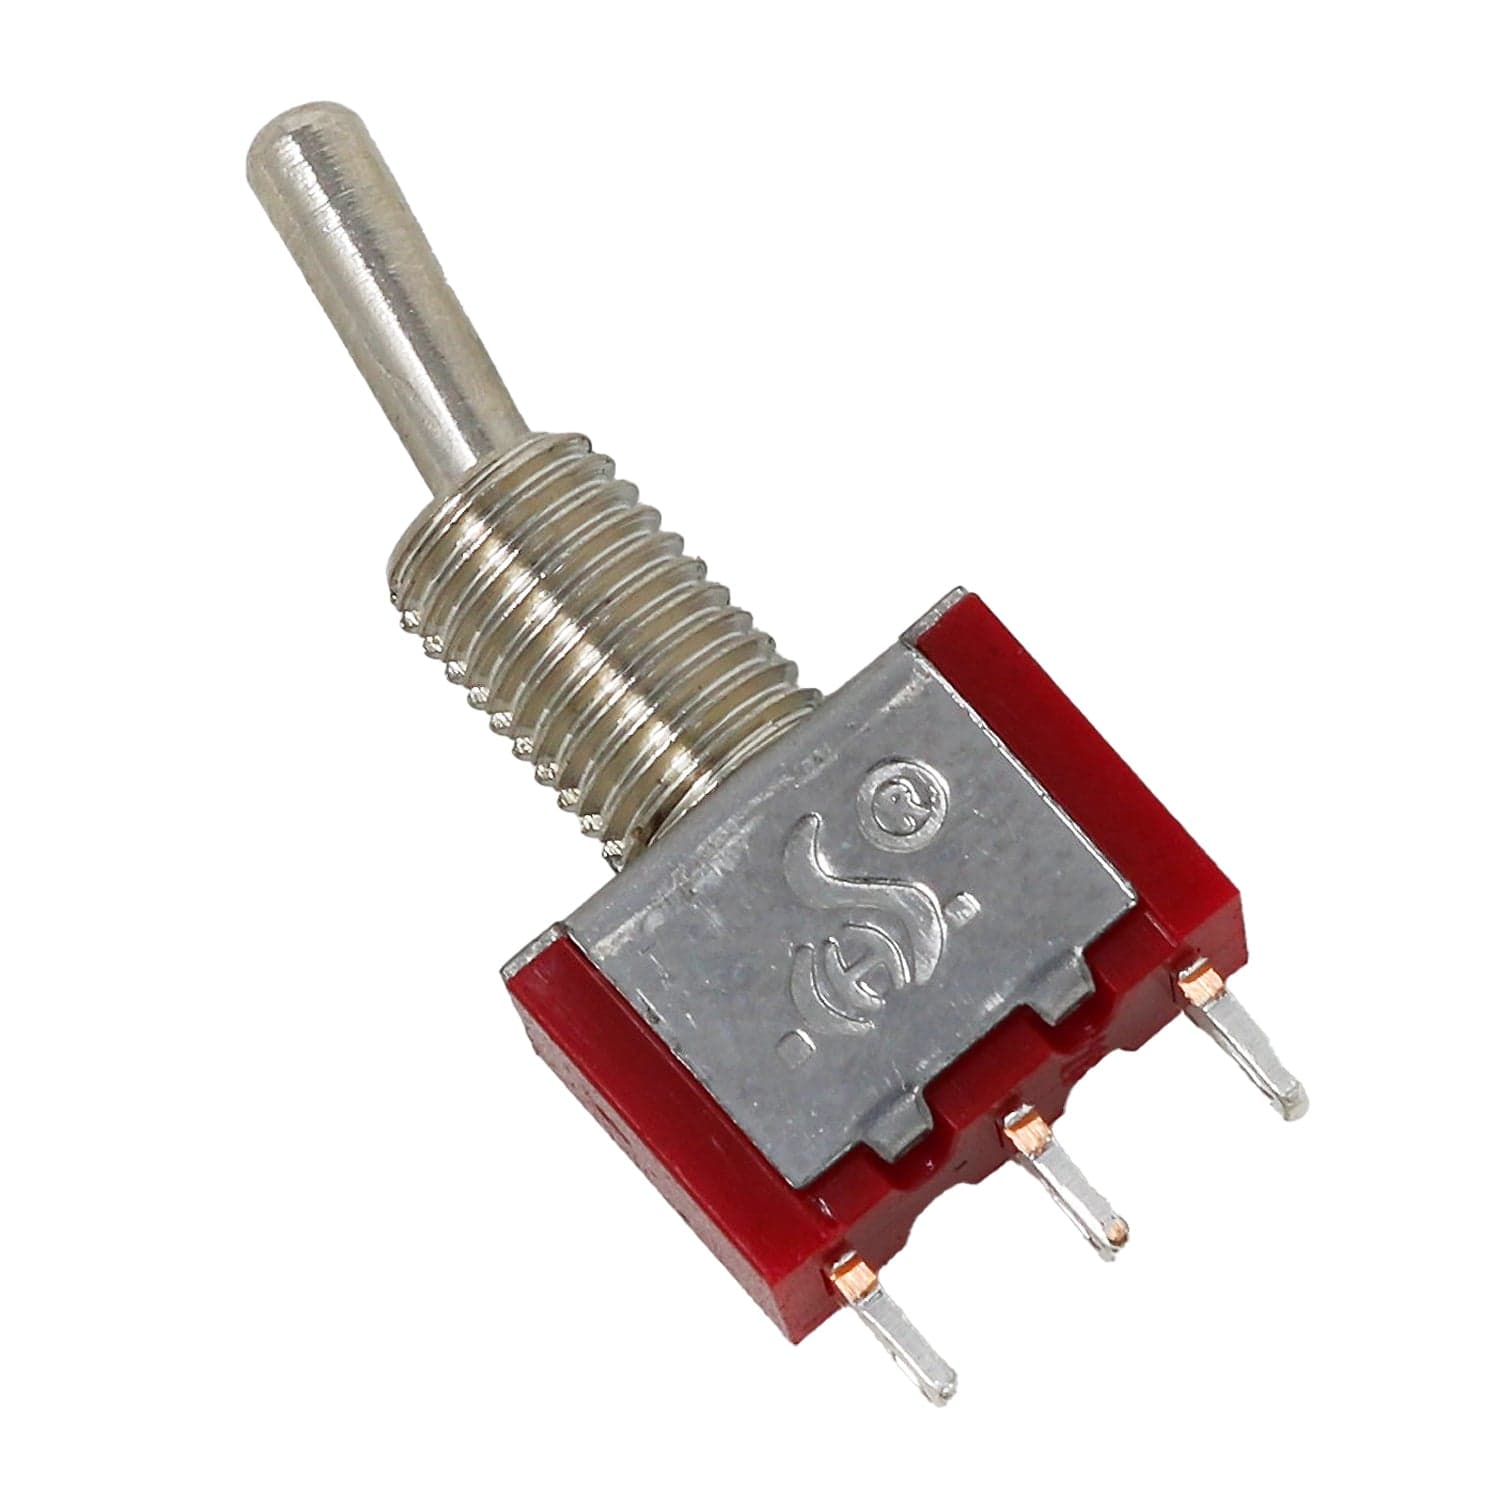 SPDT ON-(ON) Non-Latching Spring-Return Miniature Toggle Switch - The Pi Hut